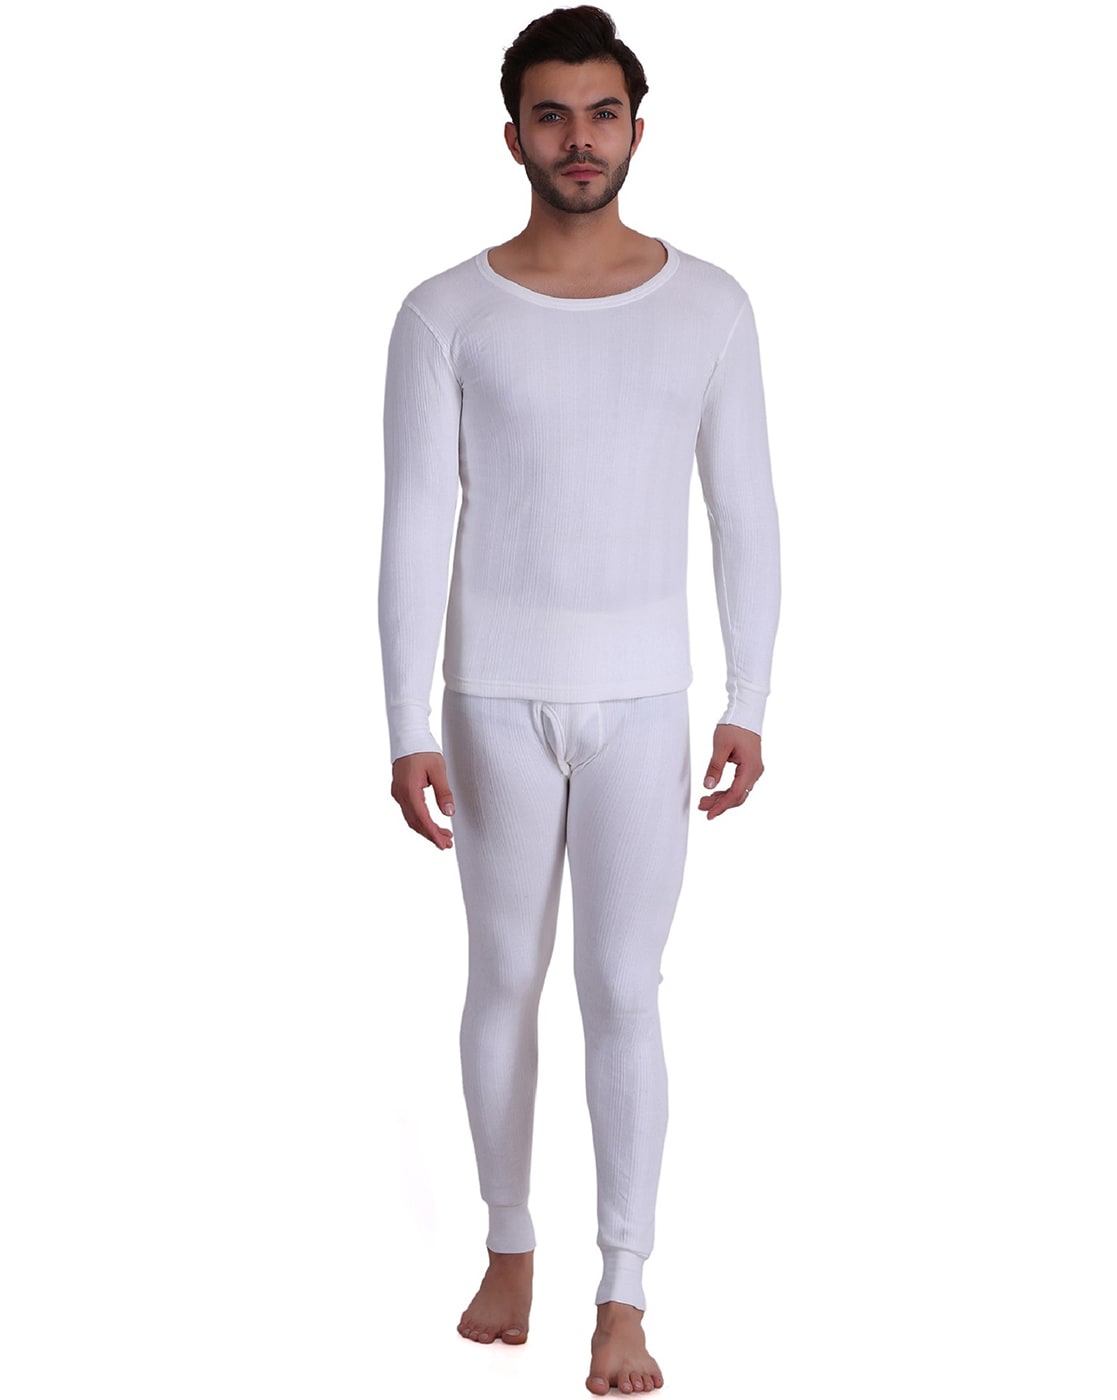 White Mens Women Thermal Tops - Get Best Price from Manufacturers &  Suppliers in India